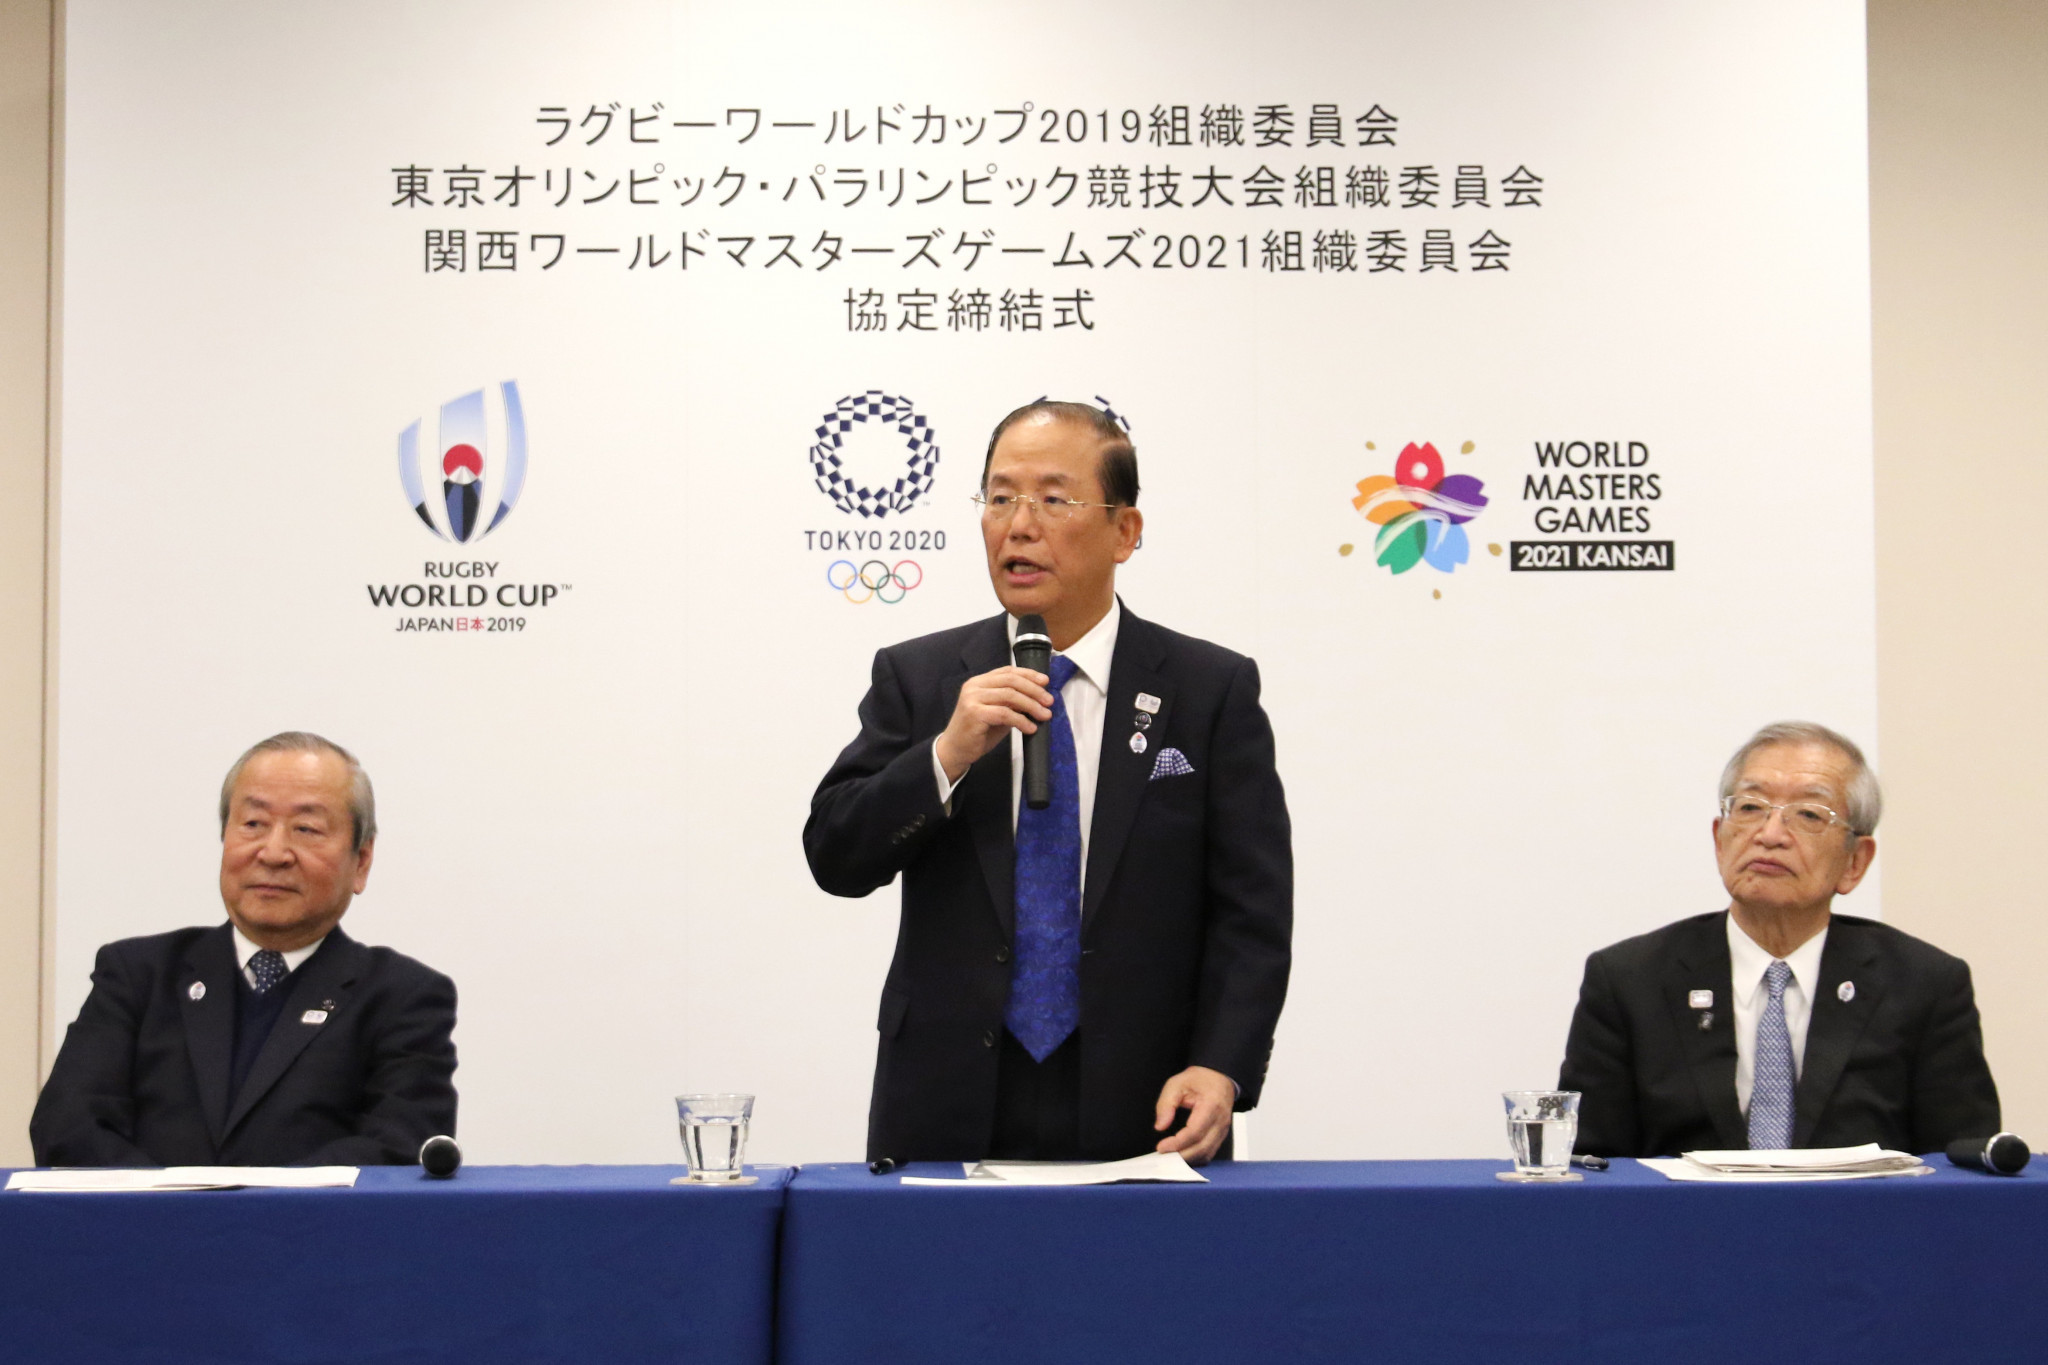 Tokyo 2020 chief executive Toshirō Mutō was among those in attendance at the signing ceremony ©Tokyo 2020